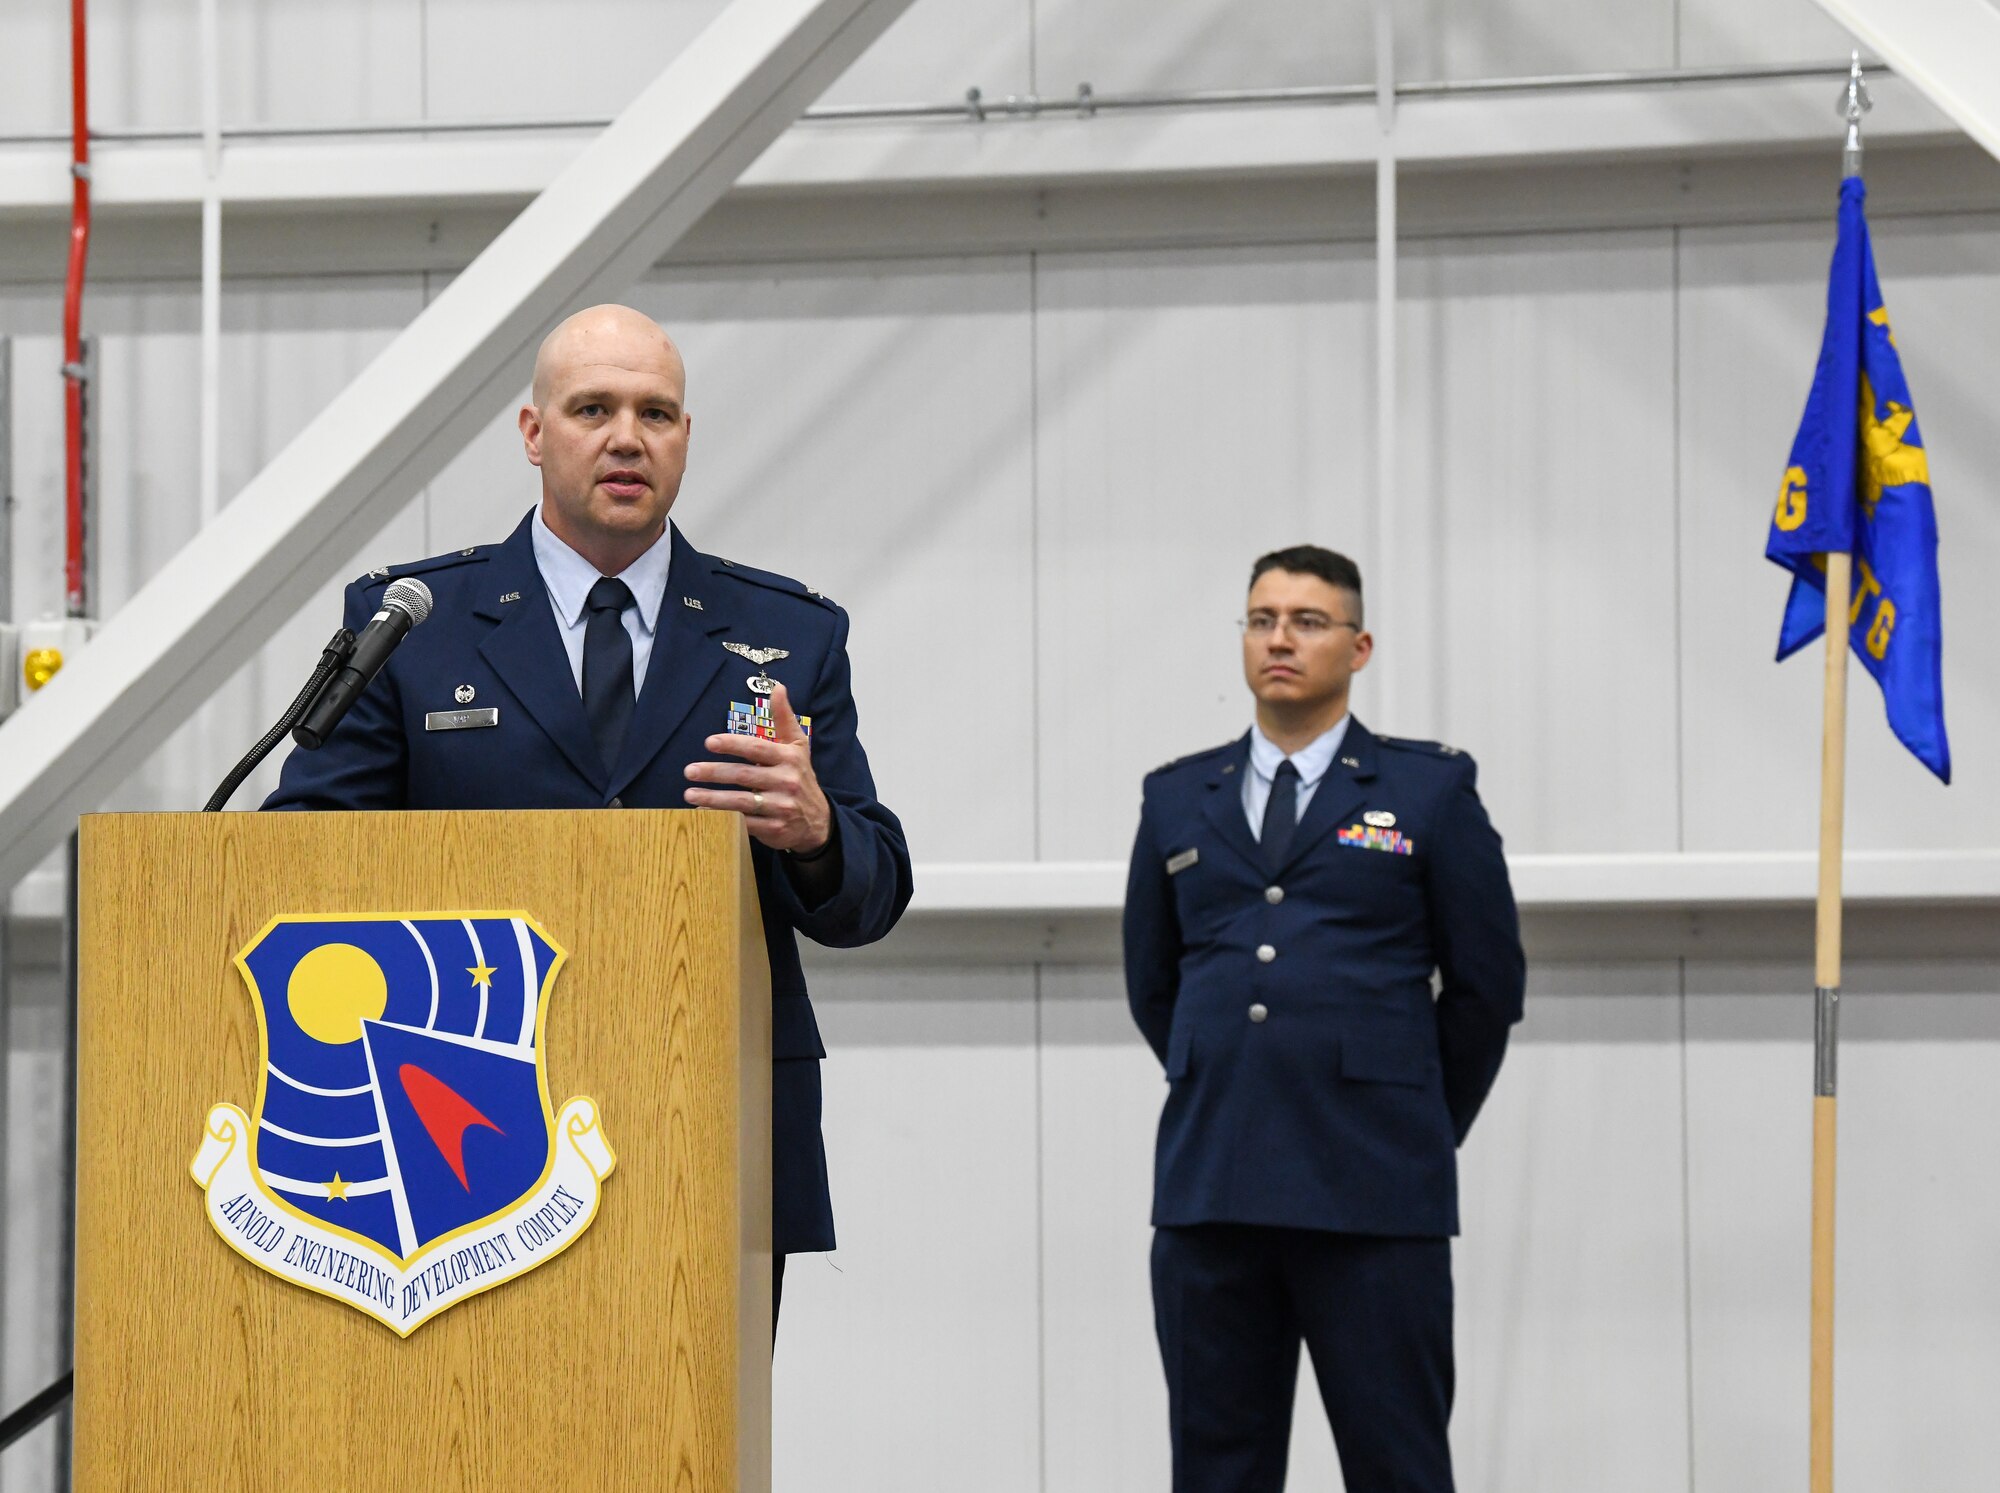 Col. Jason Vap, commander of the 804th Test Group, Arnold Engineering Development Complex, speaks after assuming command of the 804 TG during a change of command ceremony June 21, 2022, in the Aircraft Test Support Facility at Arnold Air Force Base, Tennessee. Also pictured is Capt. Christopher Fernandez, guidon bearer. (U.S. Air Force photo by Jill Pickett)